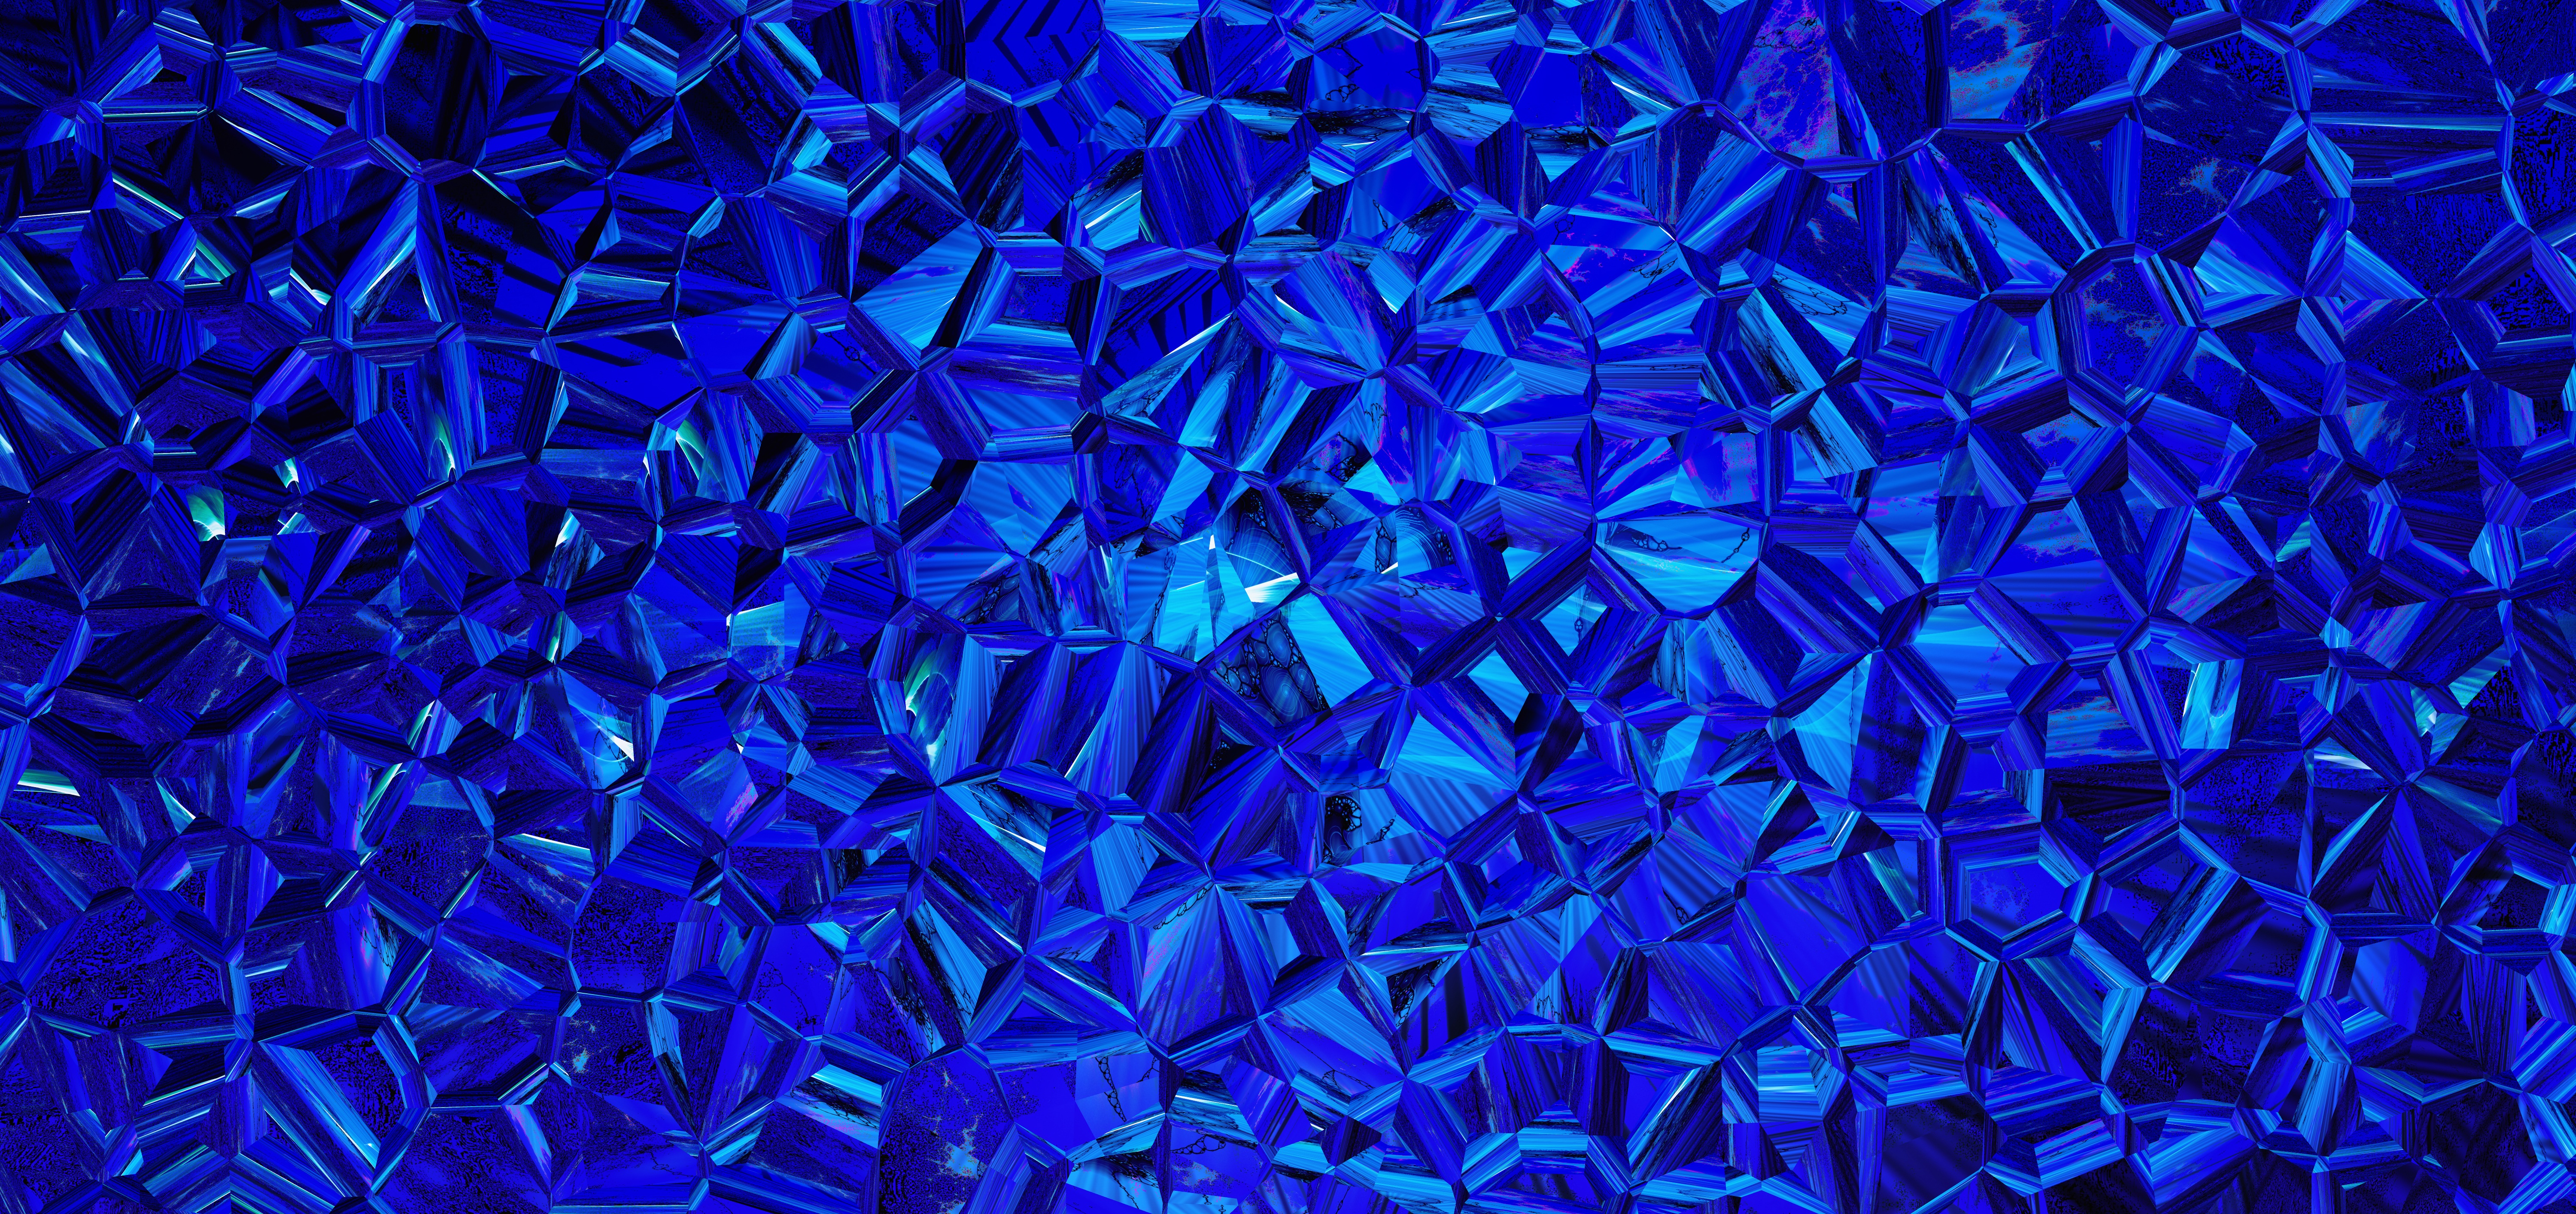 Download PC Wallpaper texture, textures, blue, prismatic, triangles, prism, polygons